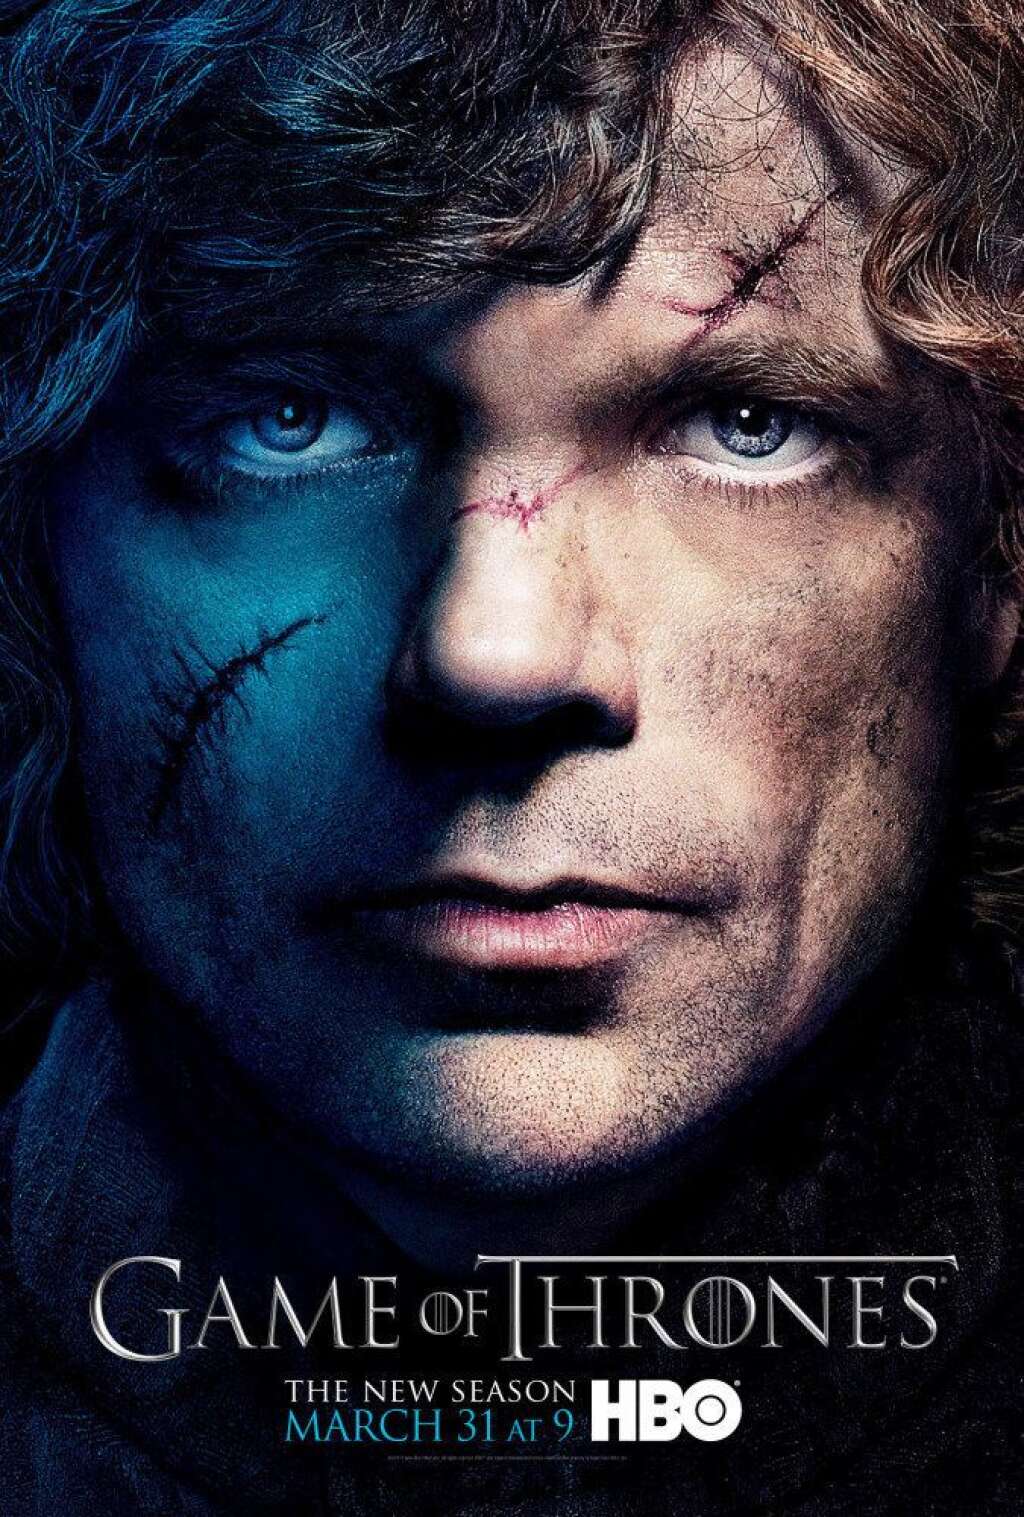 'Game of Thrones' Character Posters - Peter Dinklage as Tyrion Lannister.